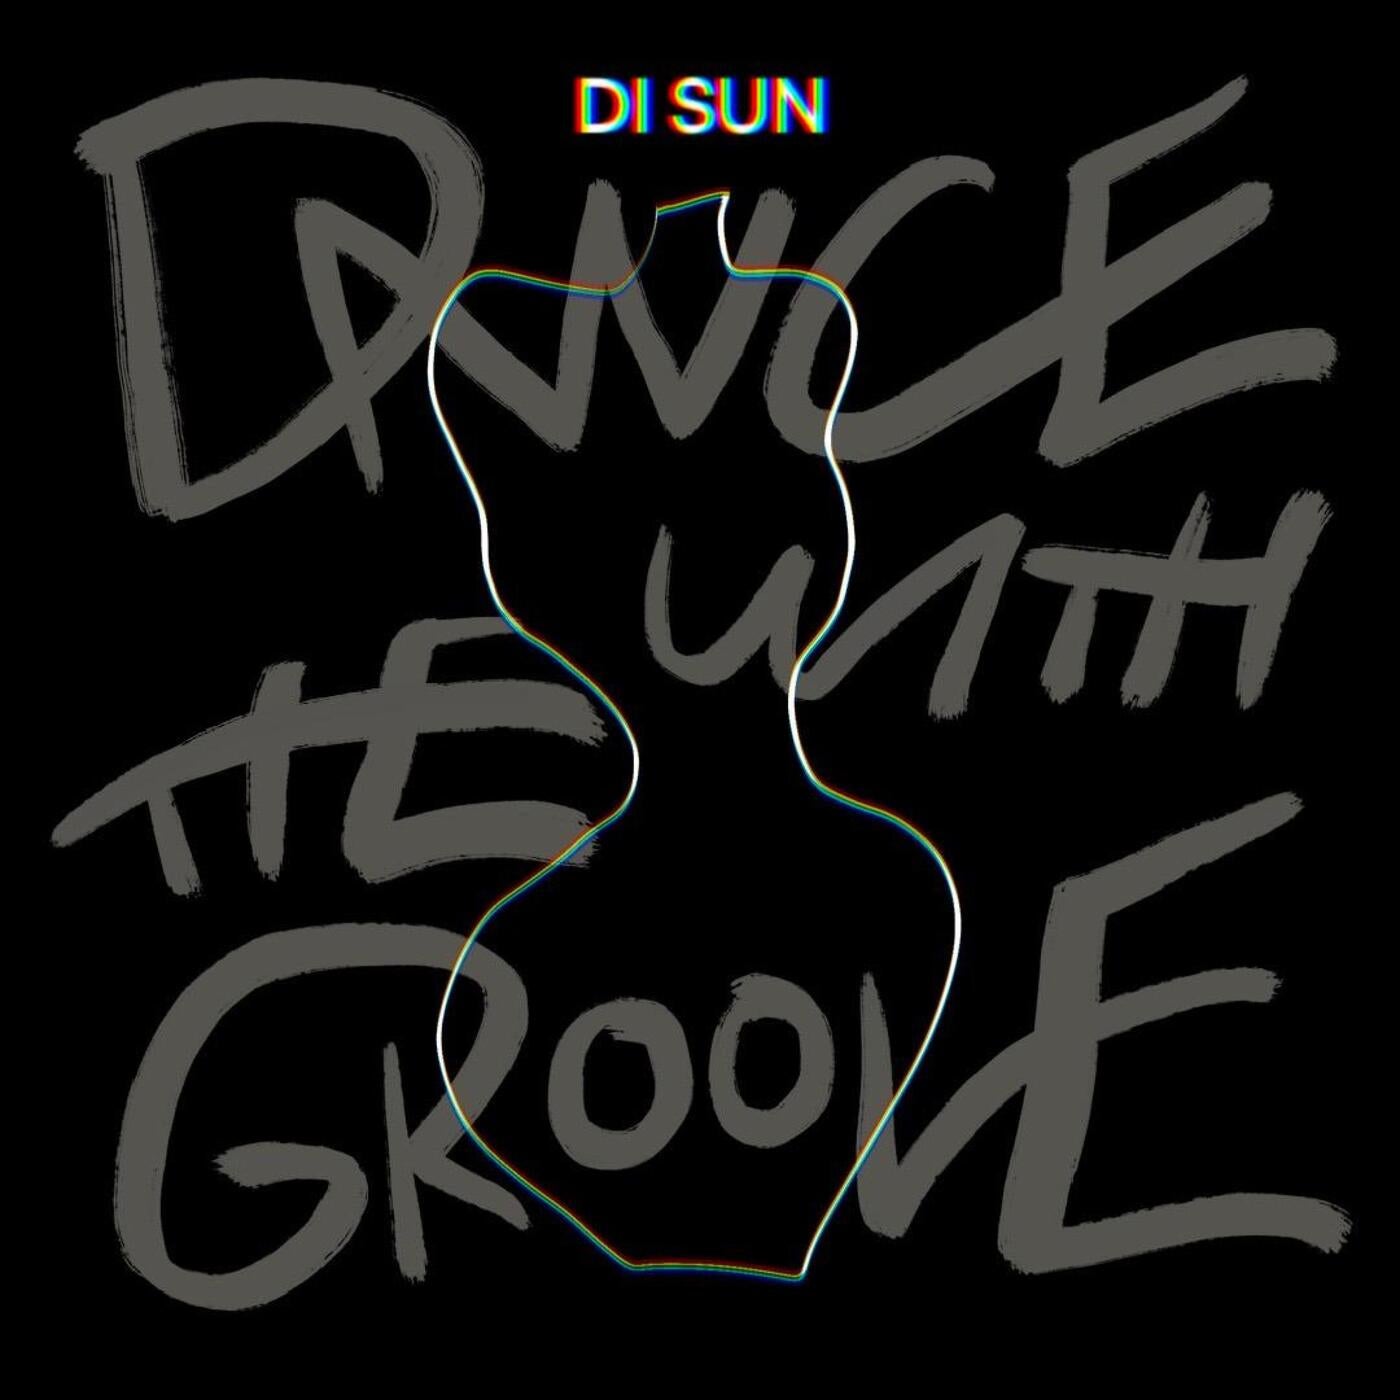 Dance with the groove